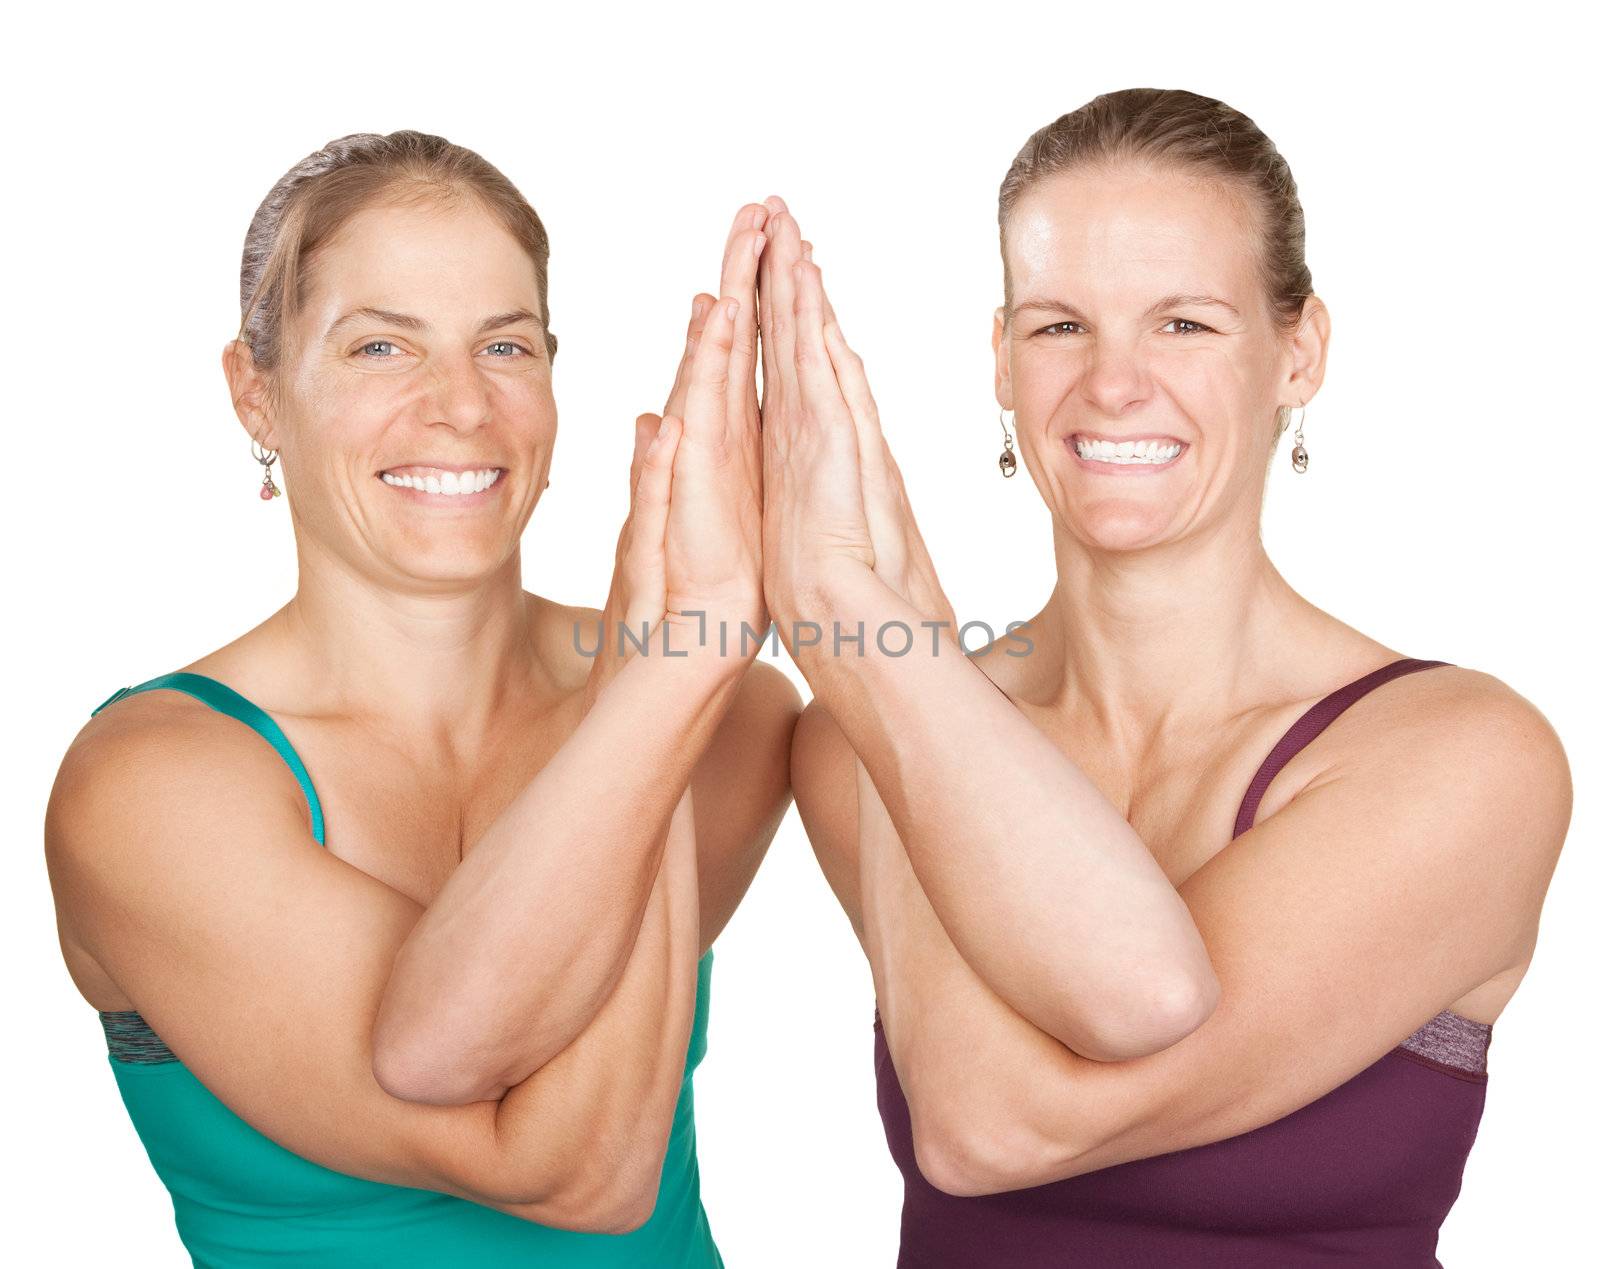 Two smiling women perform entwined namaskar over white background